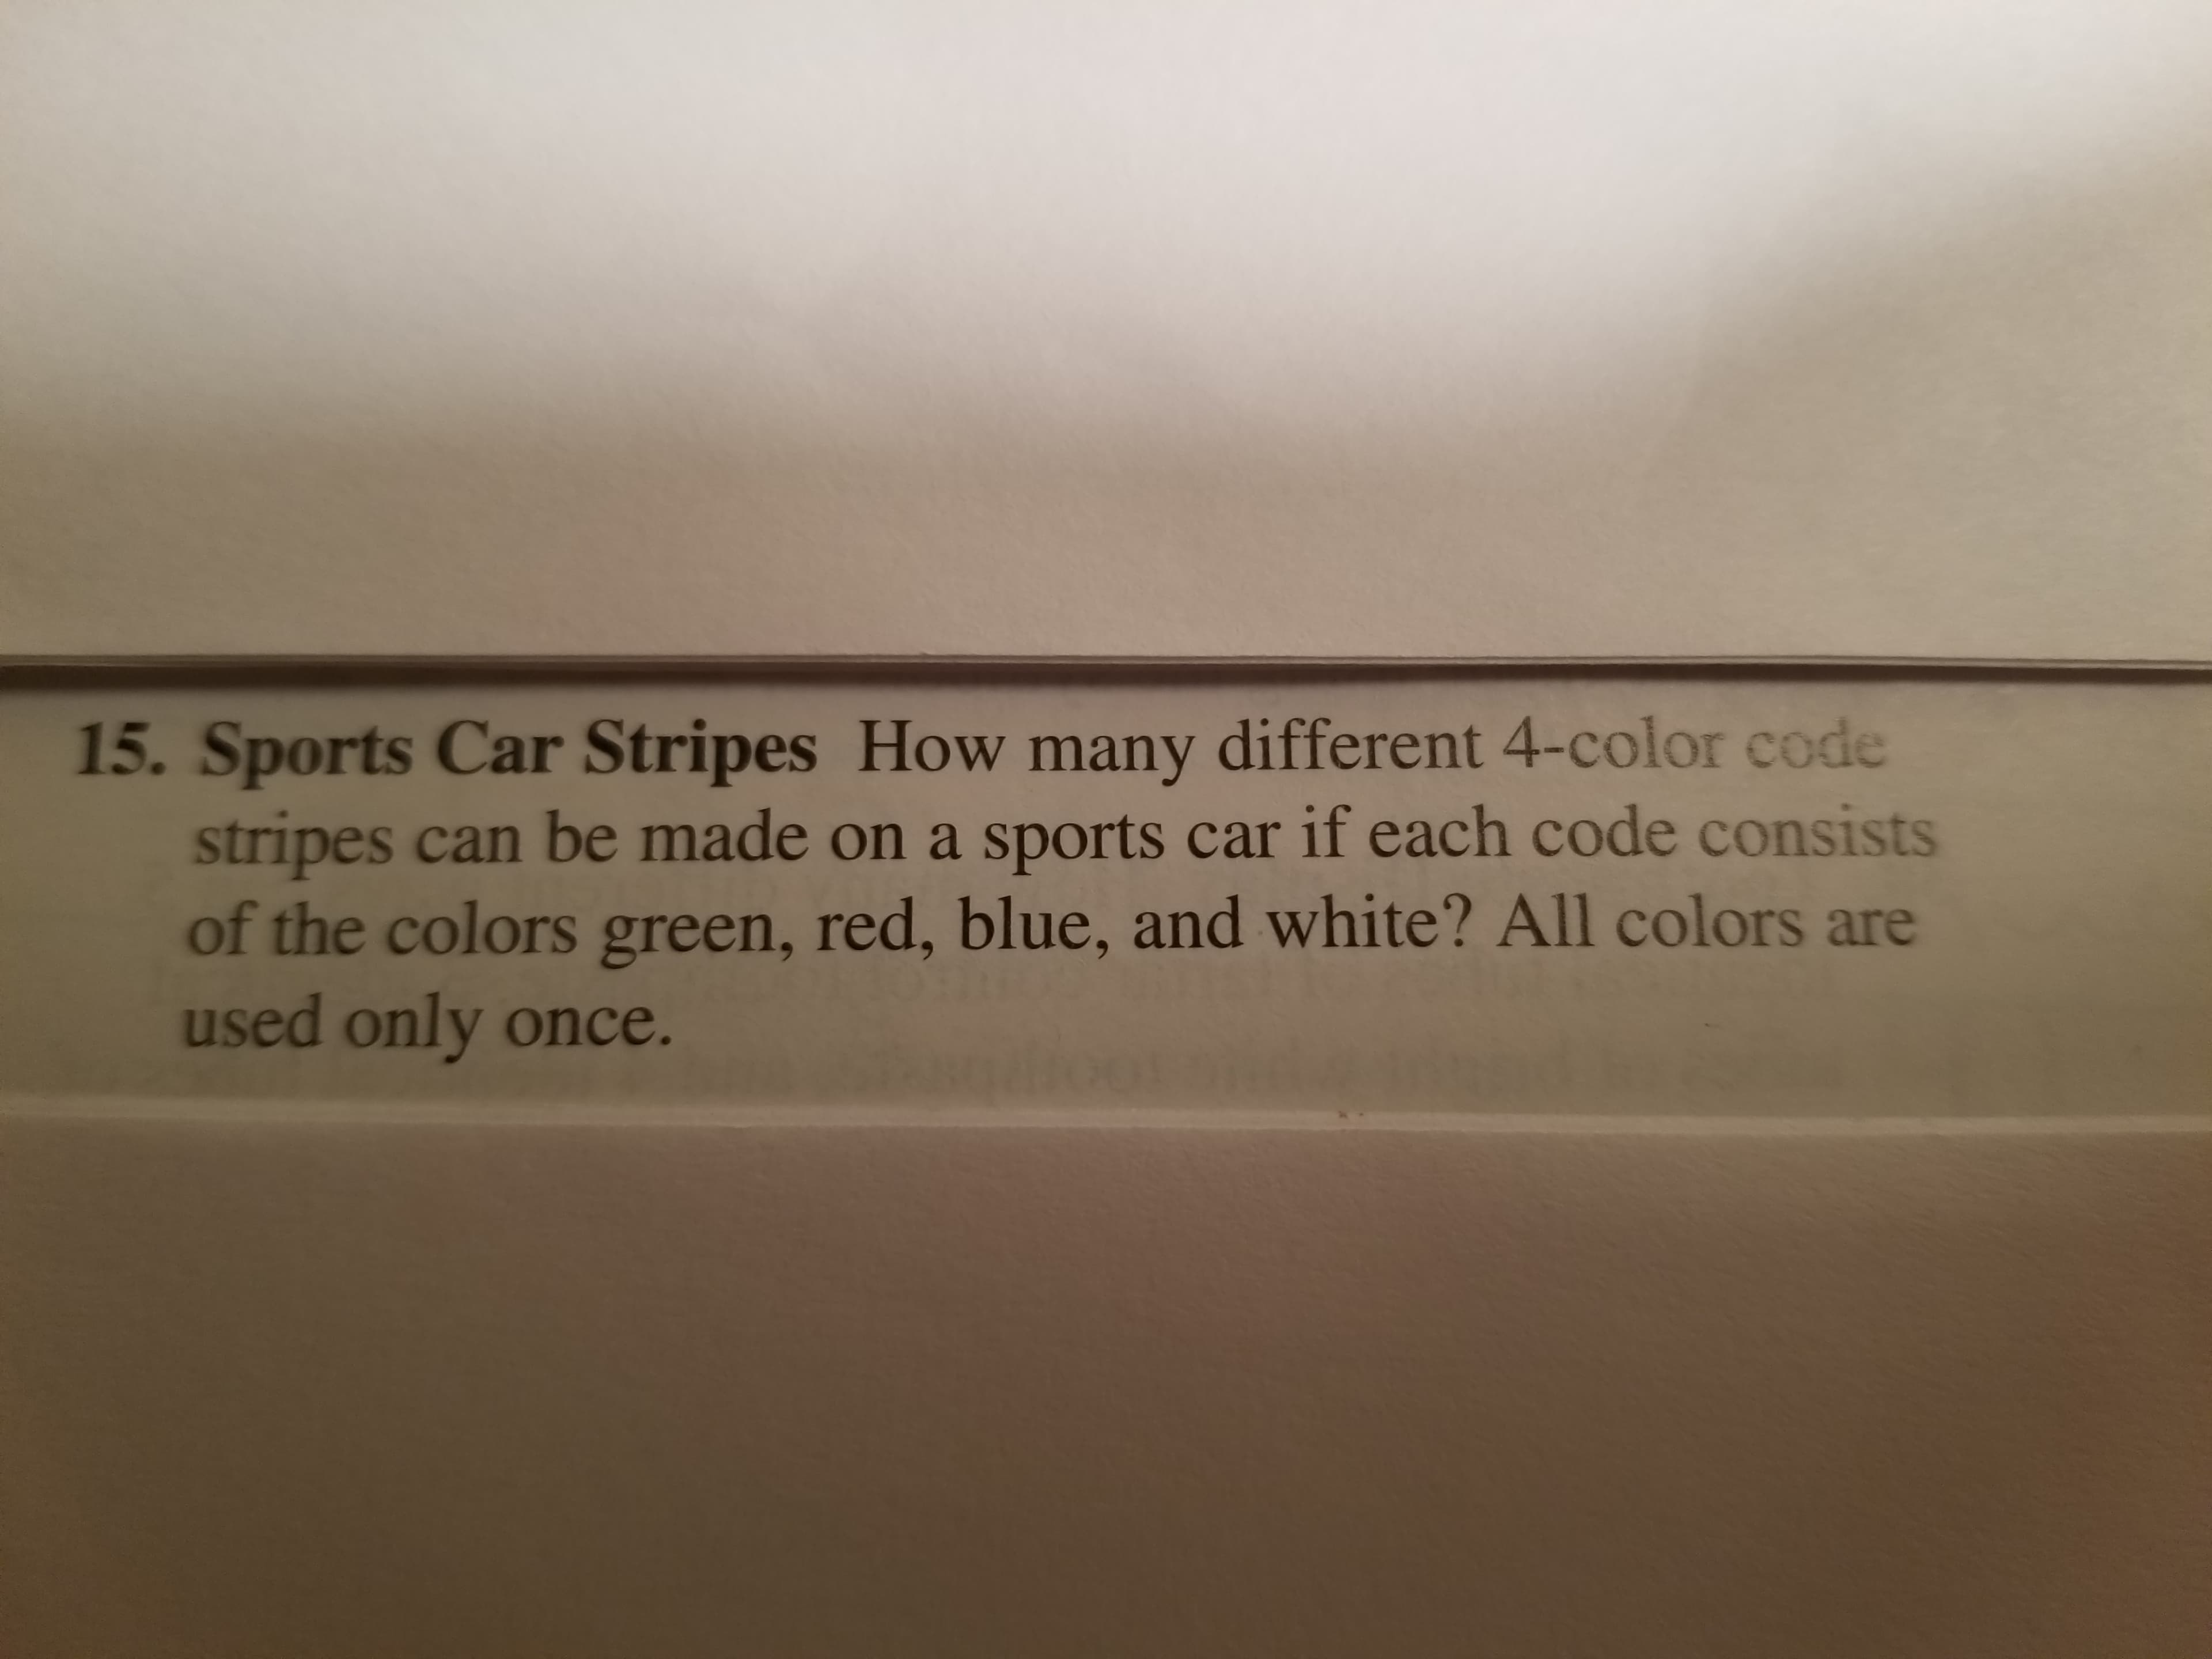 15. Sports Car Stripes How many different 4-color code
stripes can be made on a sports car if each code consists
of the colors green, red, blue, and white? All colors are
used only once.
